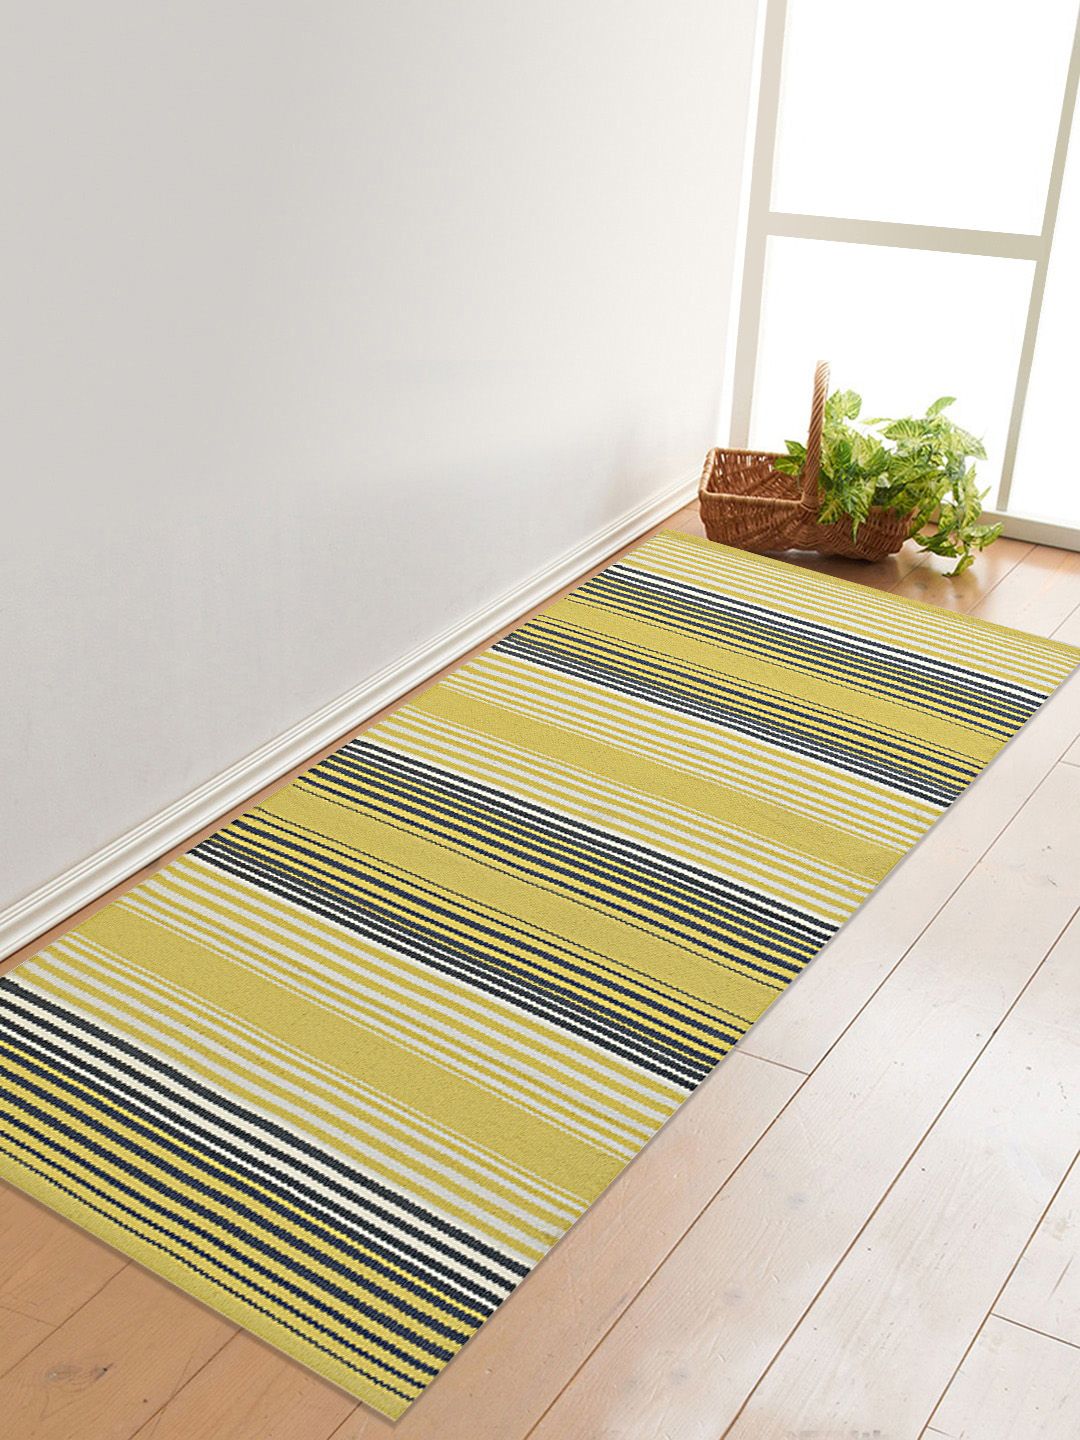 Saral Home Unisex Yellow, White & Black Striped Rugs Price in India